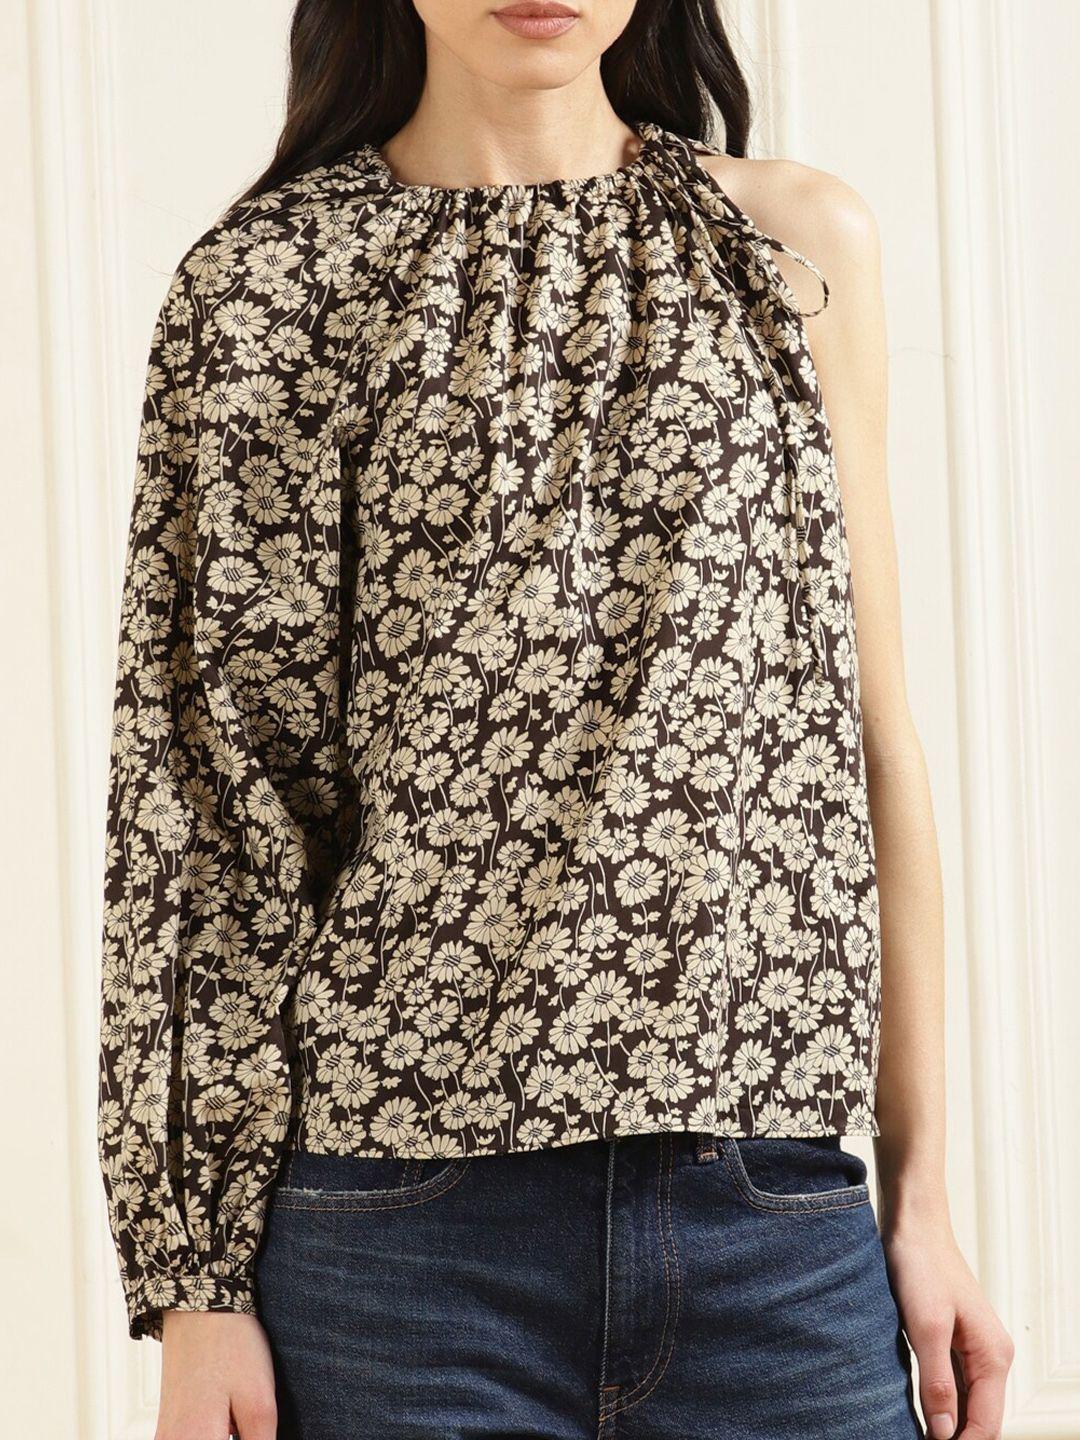 polo ralph lauren floral printed cotton one-sleeve blouse top